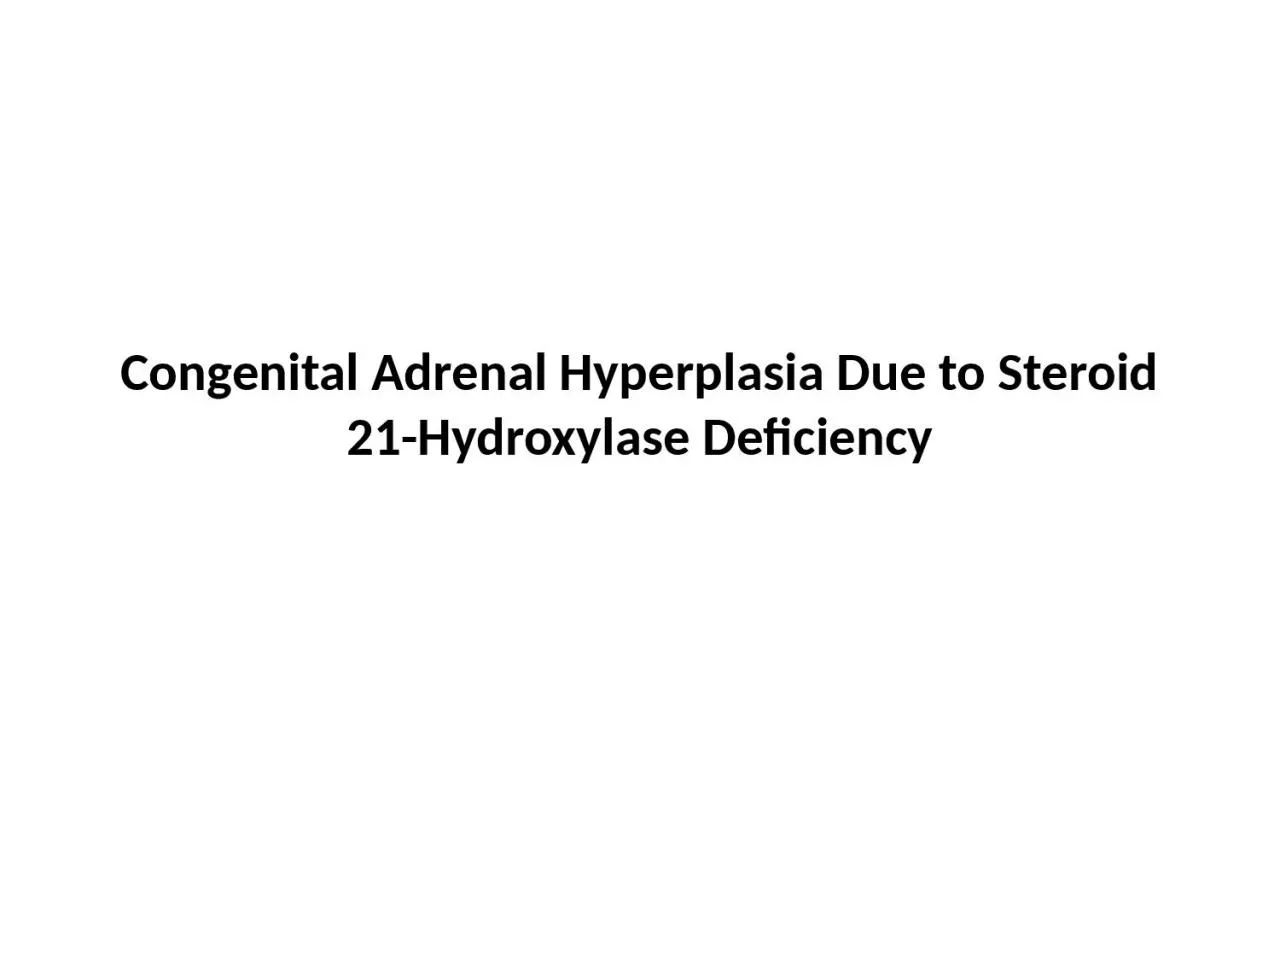 Congenital Adrenal Hyperplasia Due to Steroid